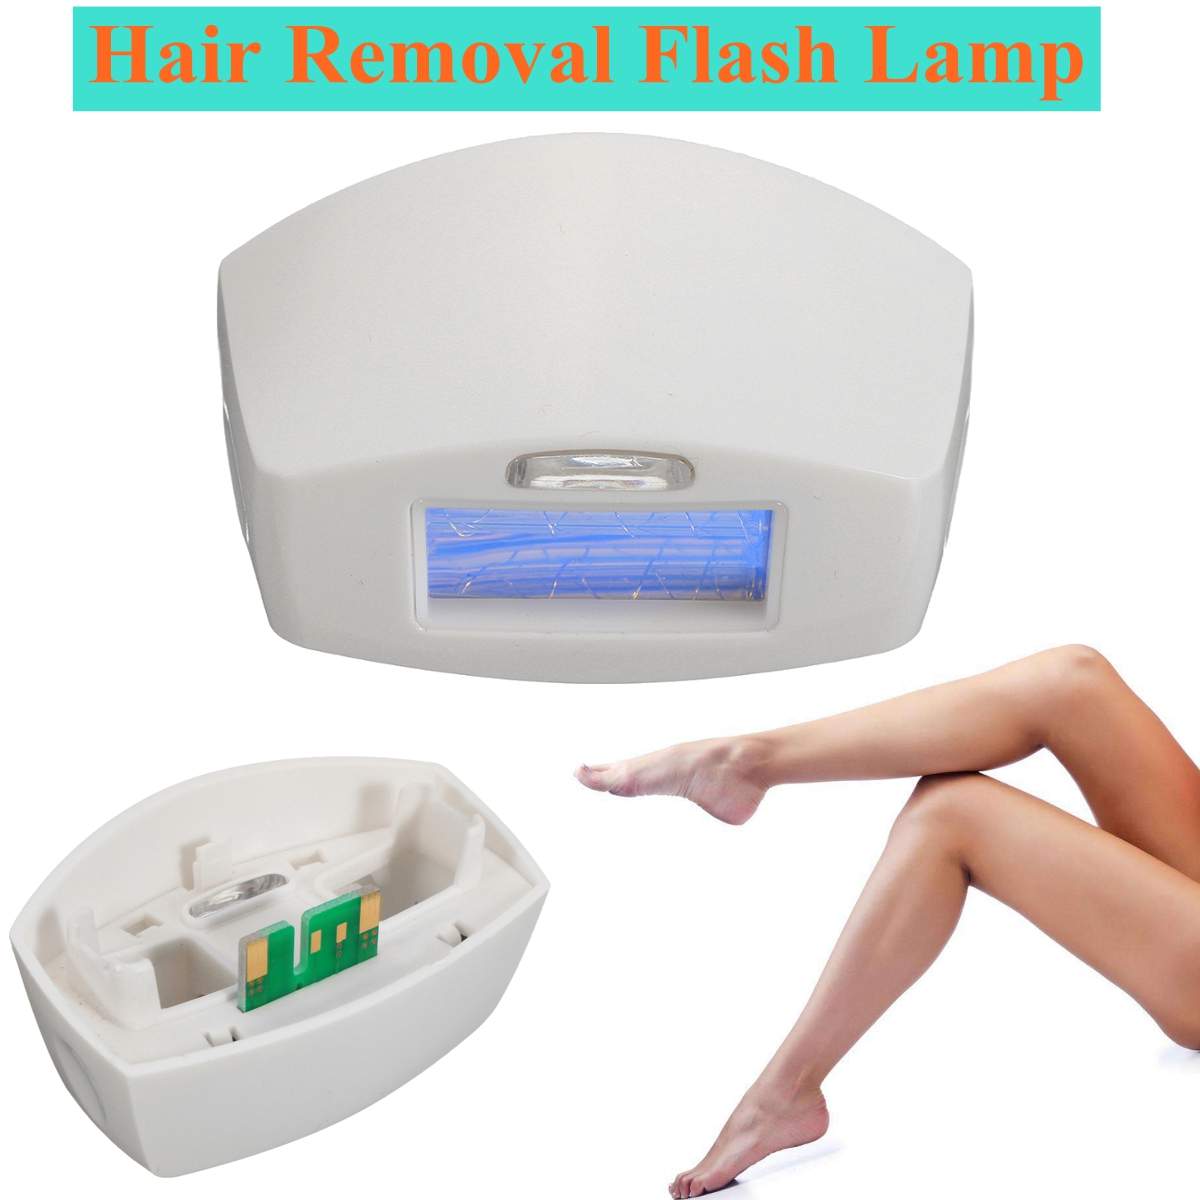 Skin Rejuvenation Home Use IPL Permanent Hair Removal Flash Lamp Machine Face and Body Lobe Moky Cartridge Replace Part